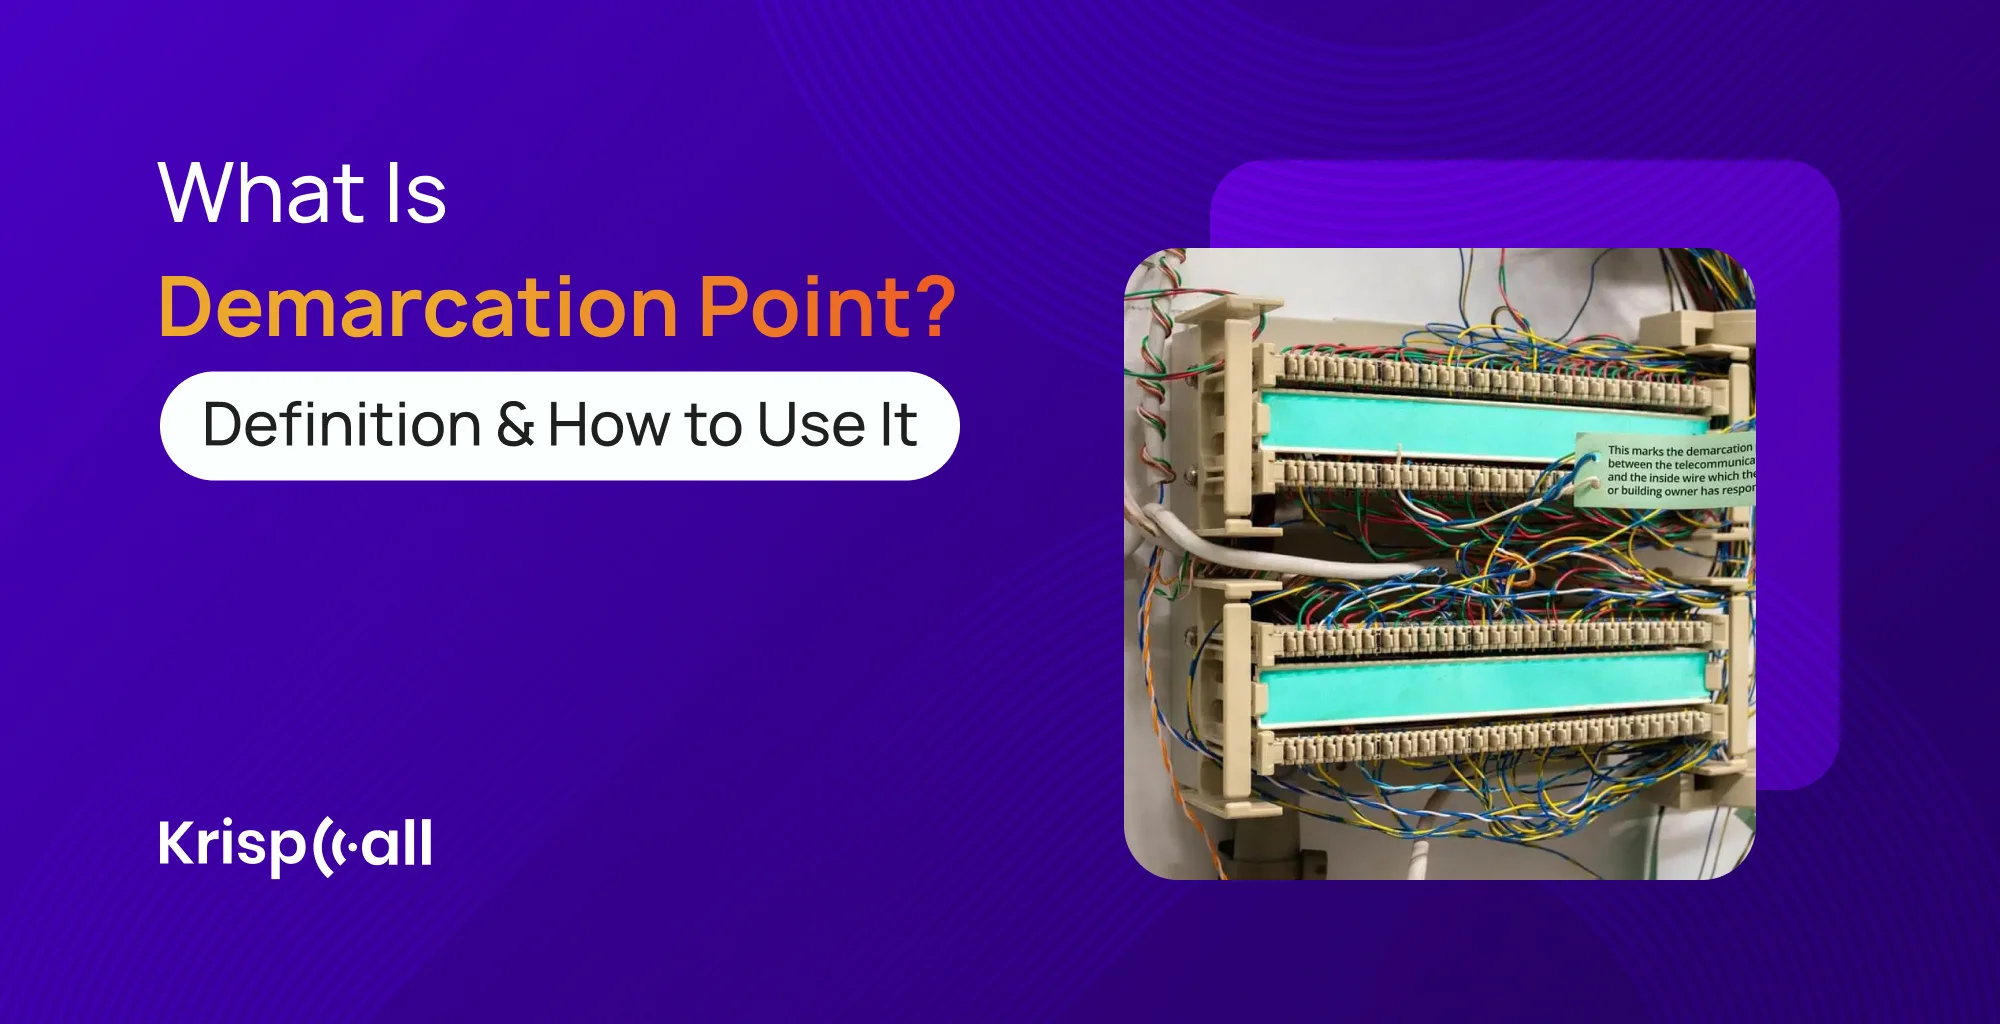 What Is Demarcation Point Definition & How to Use It